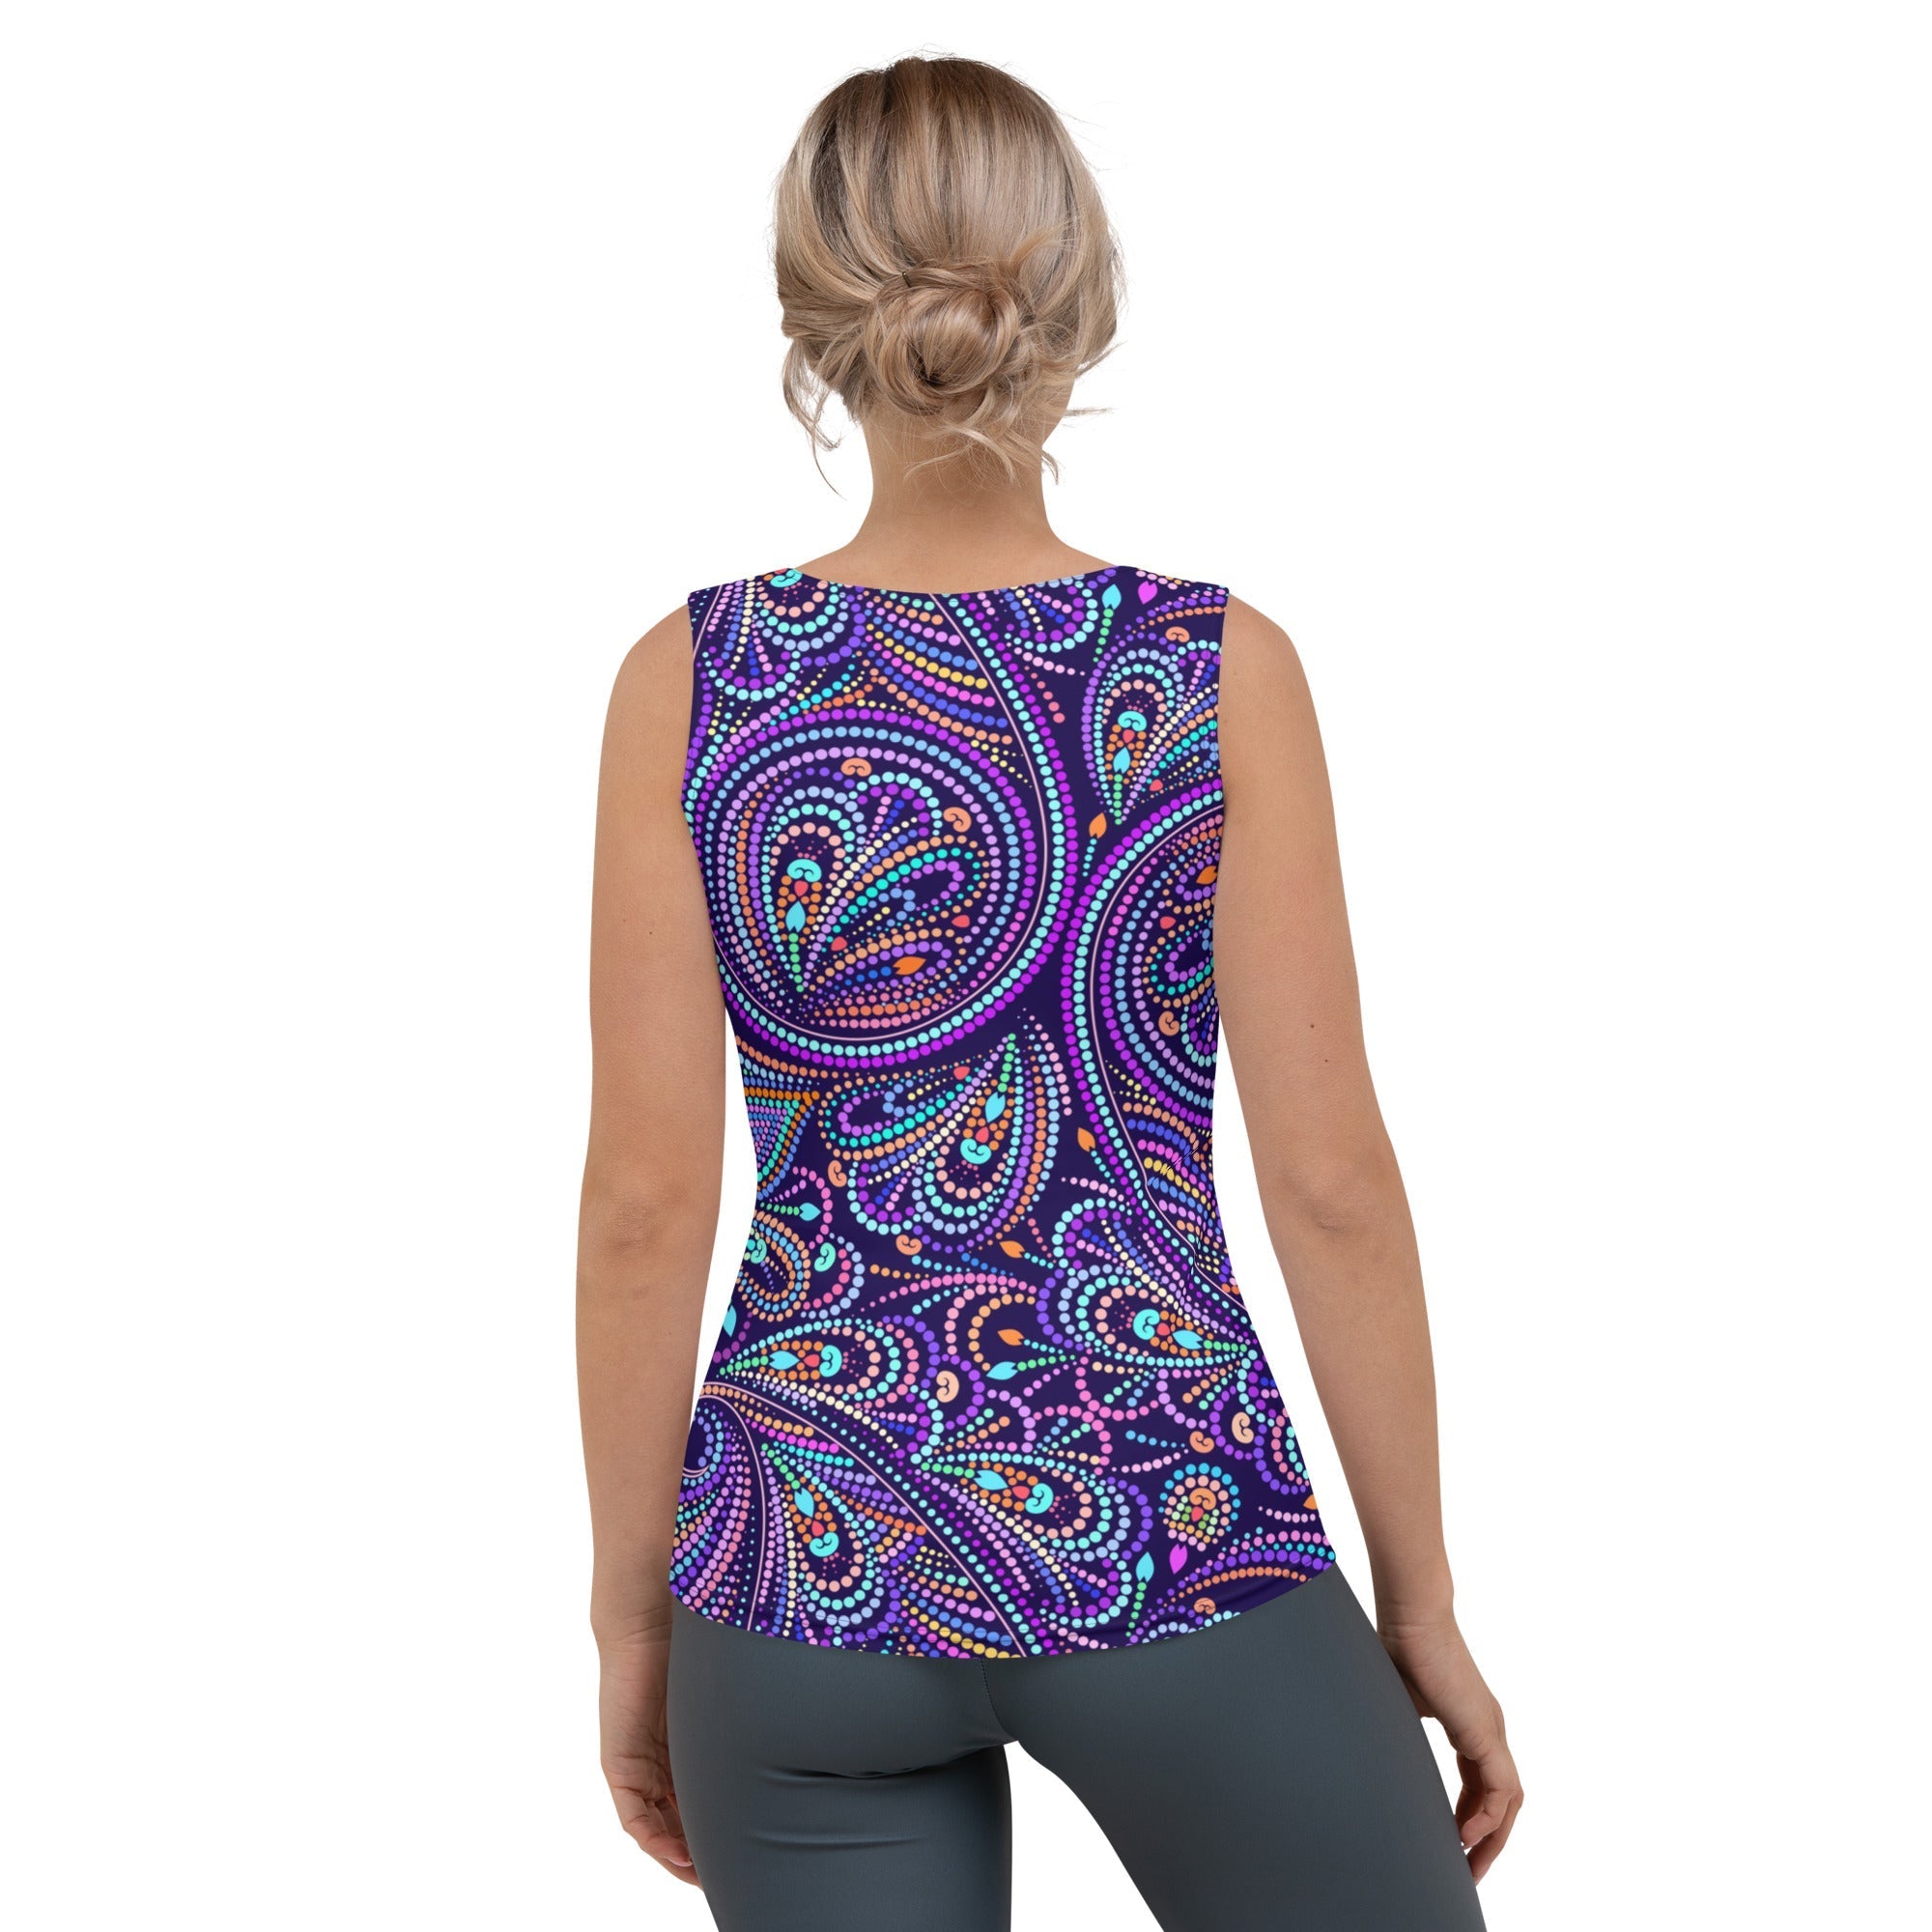 Lovely Mosaic Tank Top